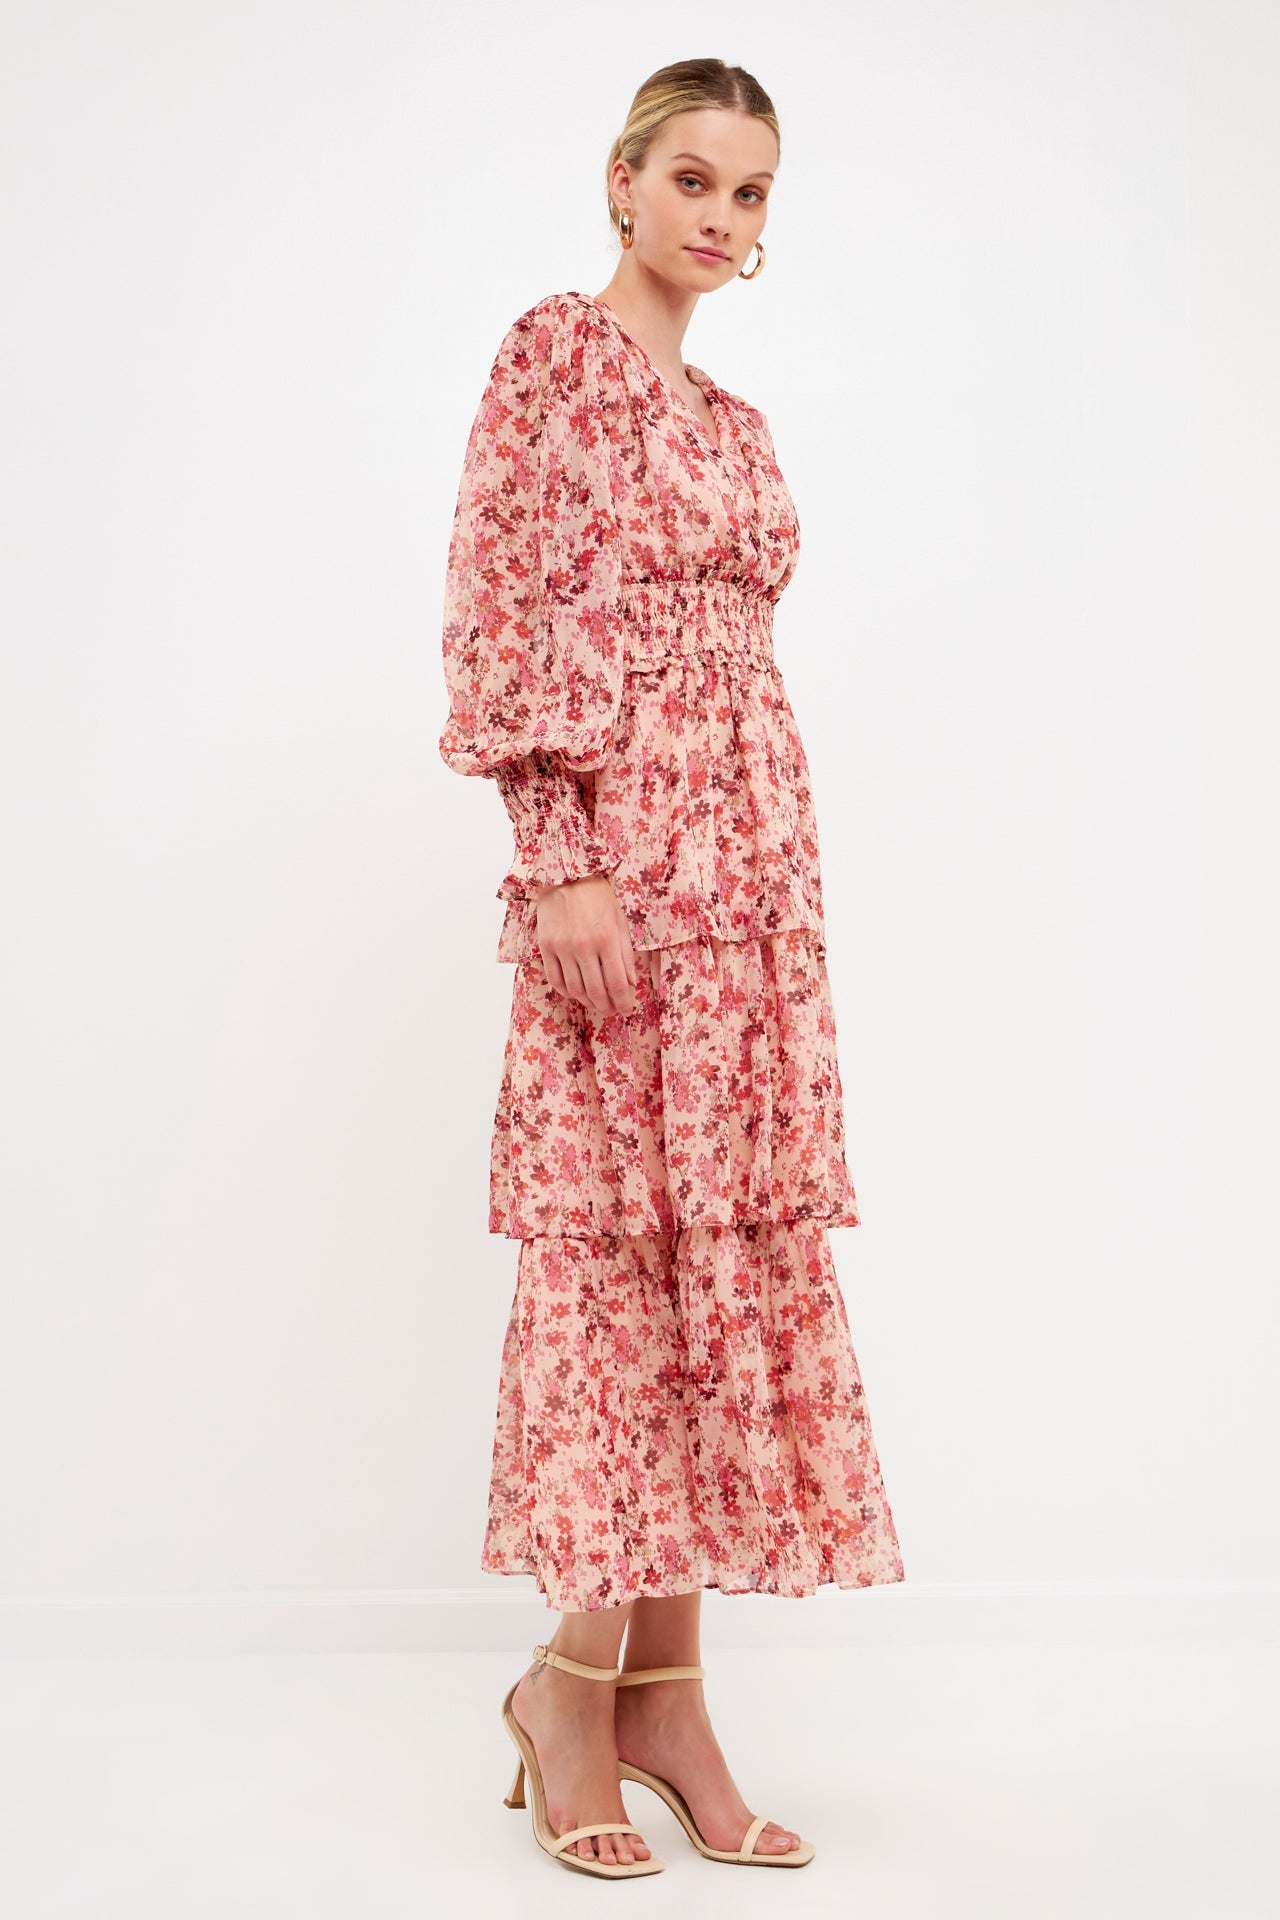 Endless Rose - Floral Long-Sleeve Maxi Dress - Dresses in Women's Clothing available at endlessrose.com